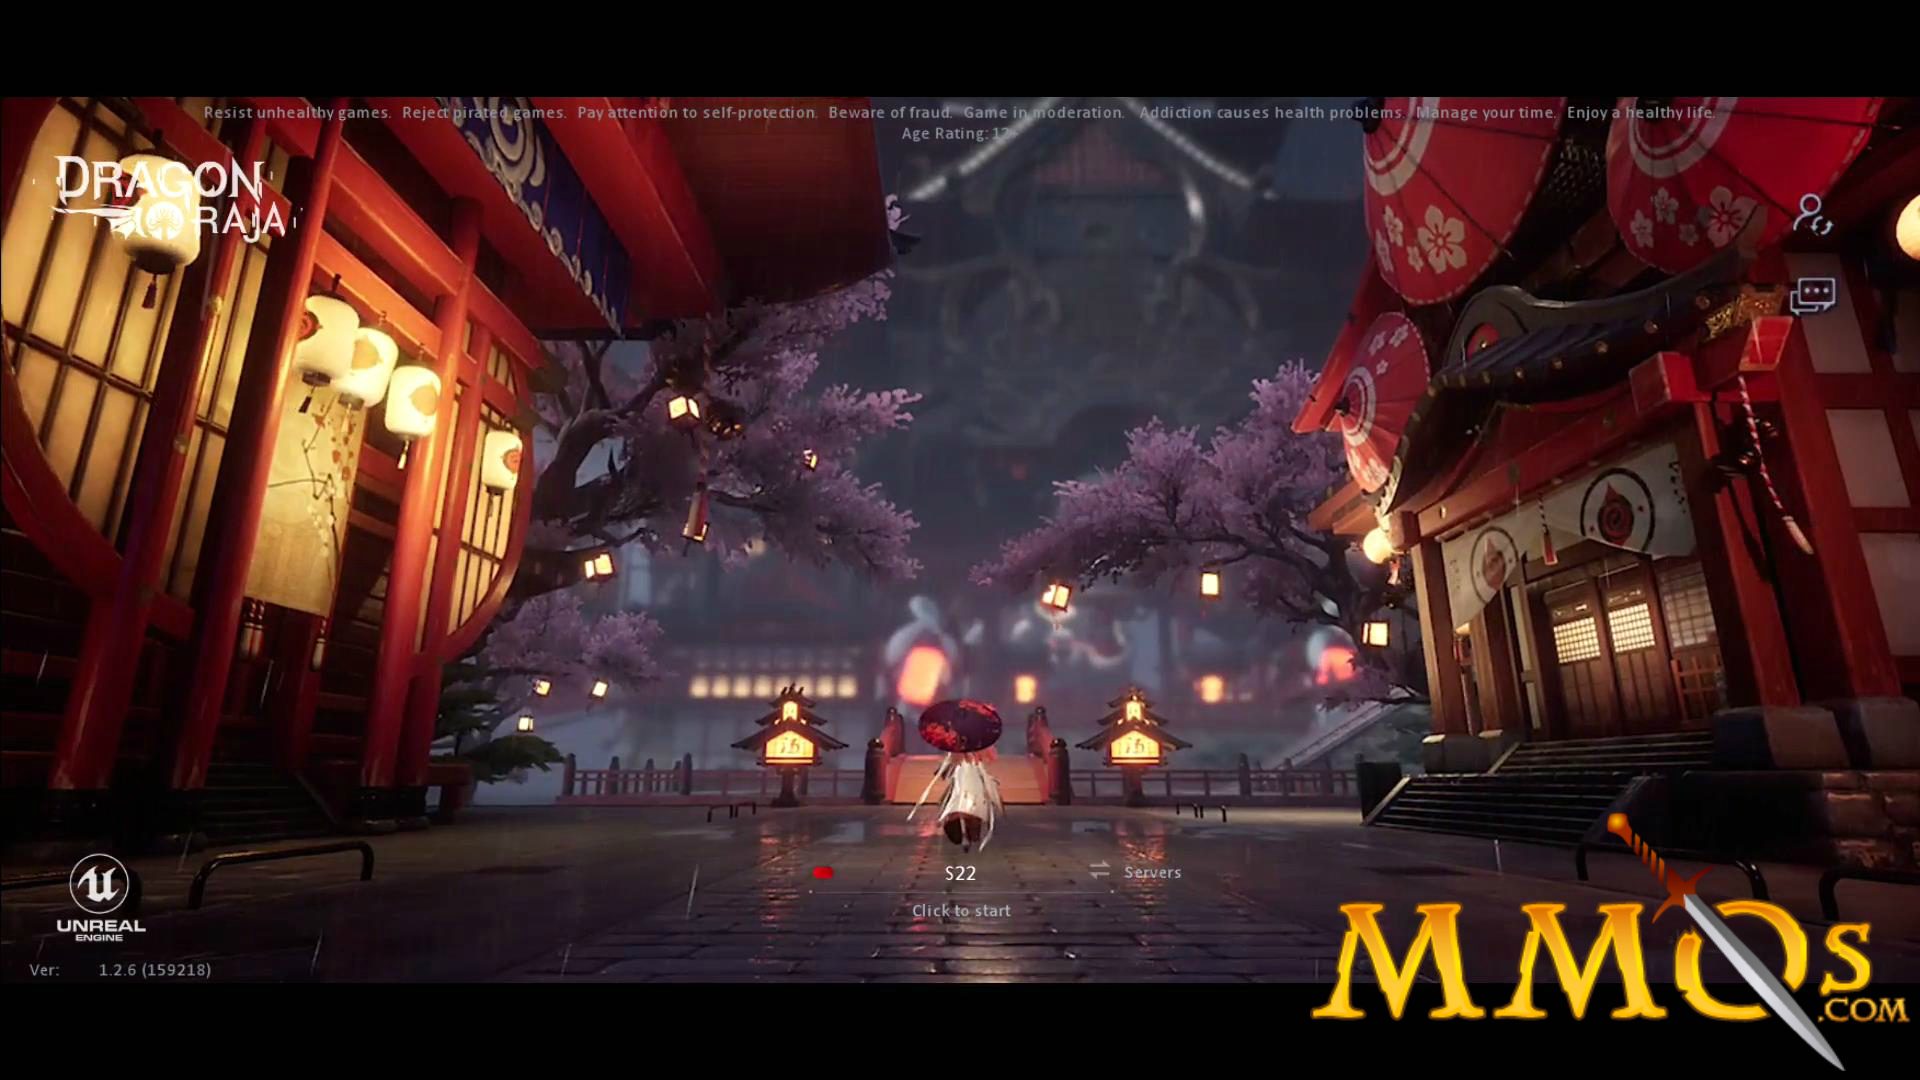 Dragon Raja - Unreal Engine 4 mobile MMORPG gets official name - MMO Culture